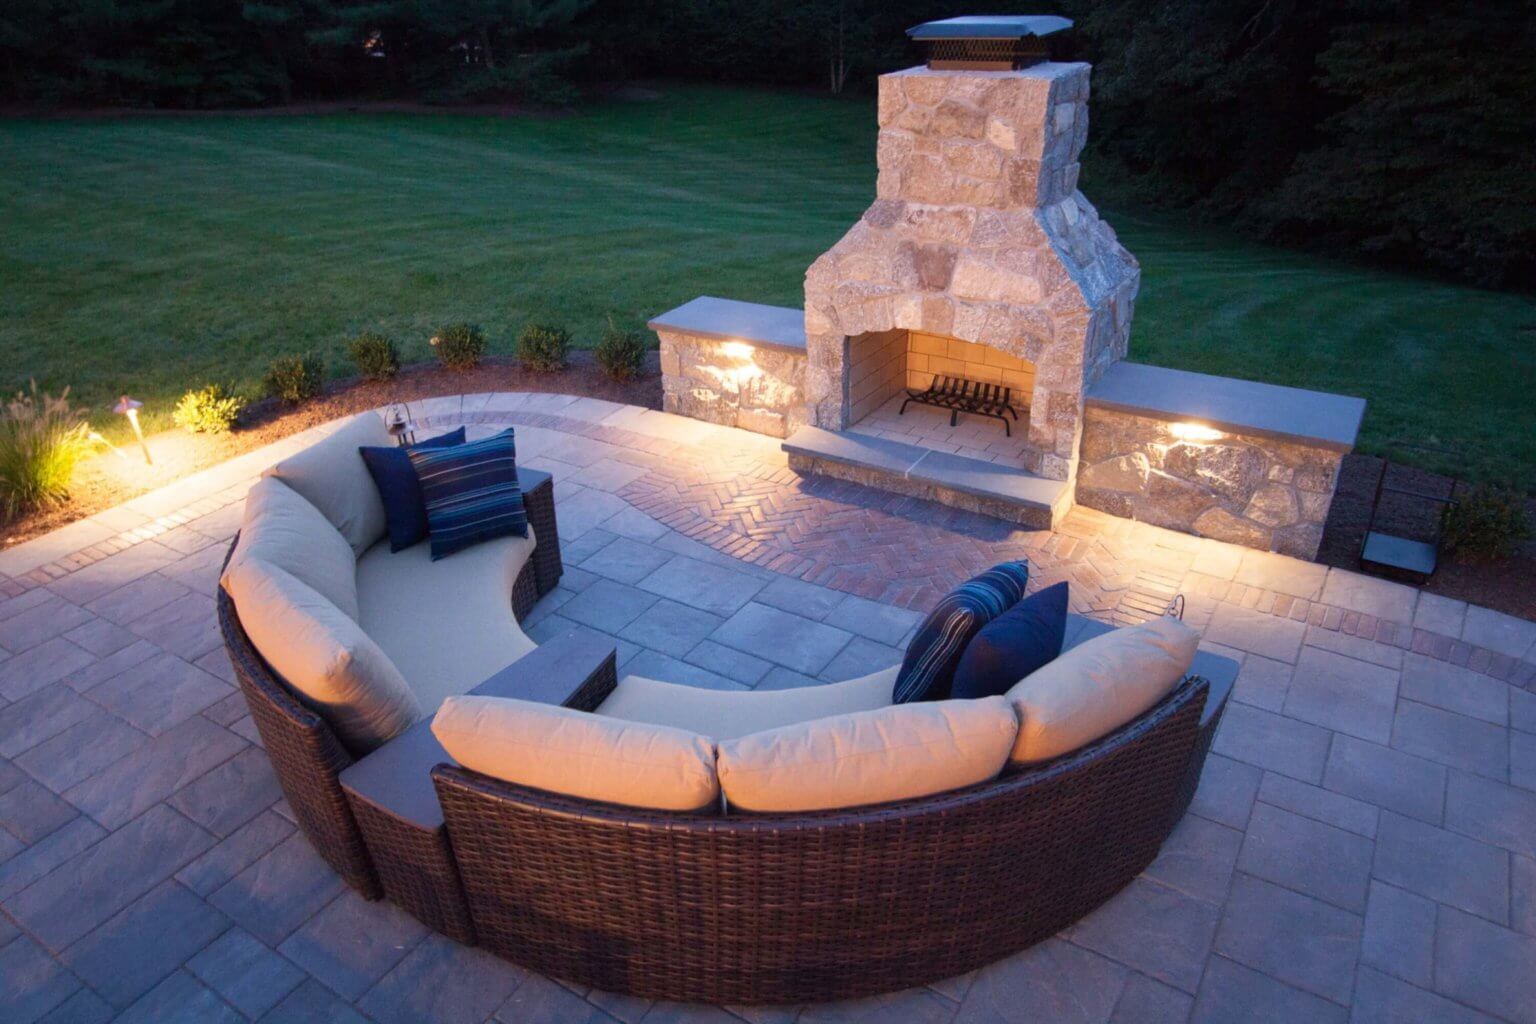 Outdoor Fireplace Kit - Contractor Series - for Easy ...